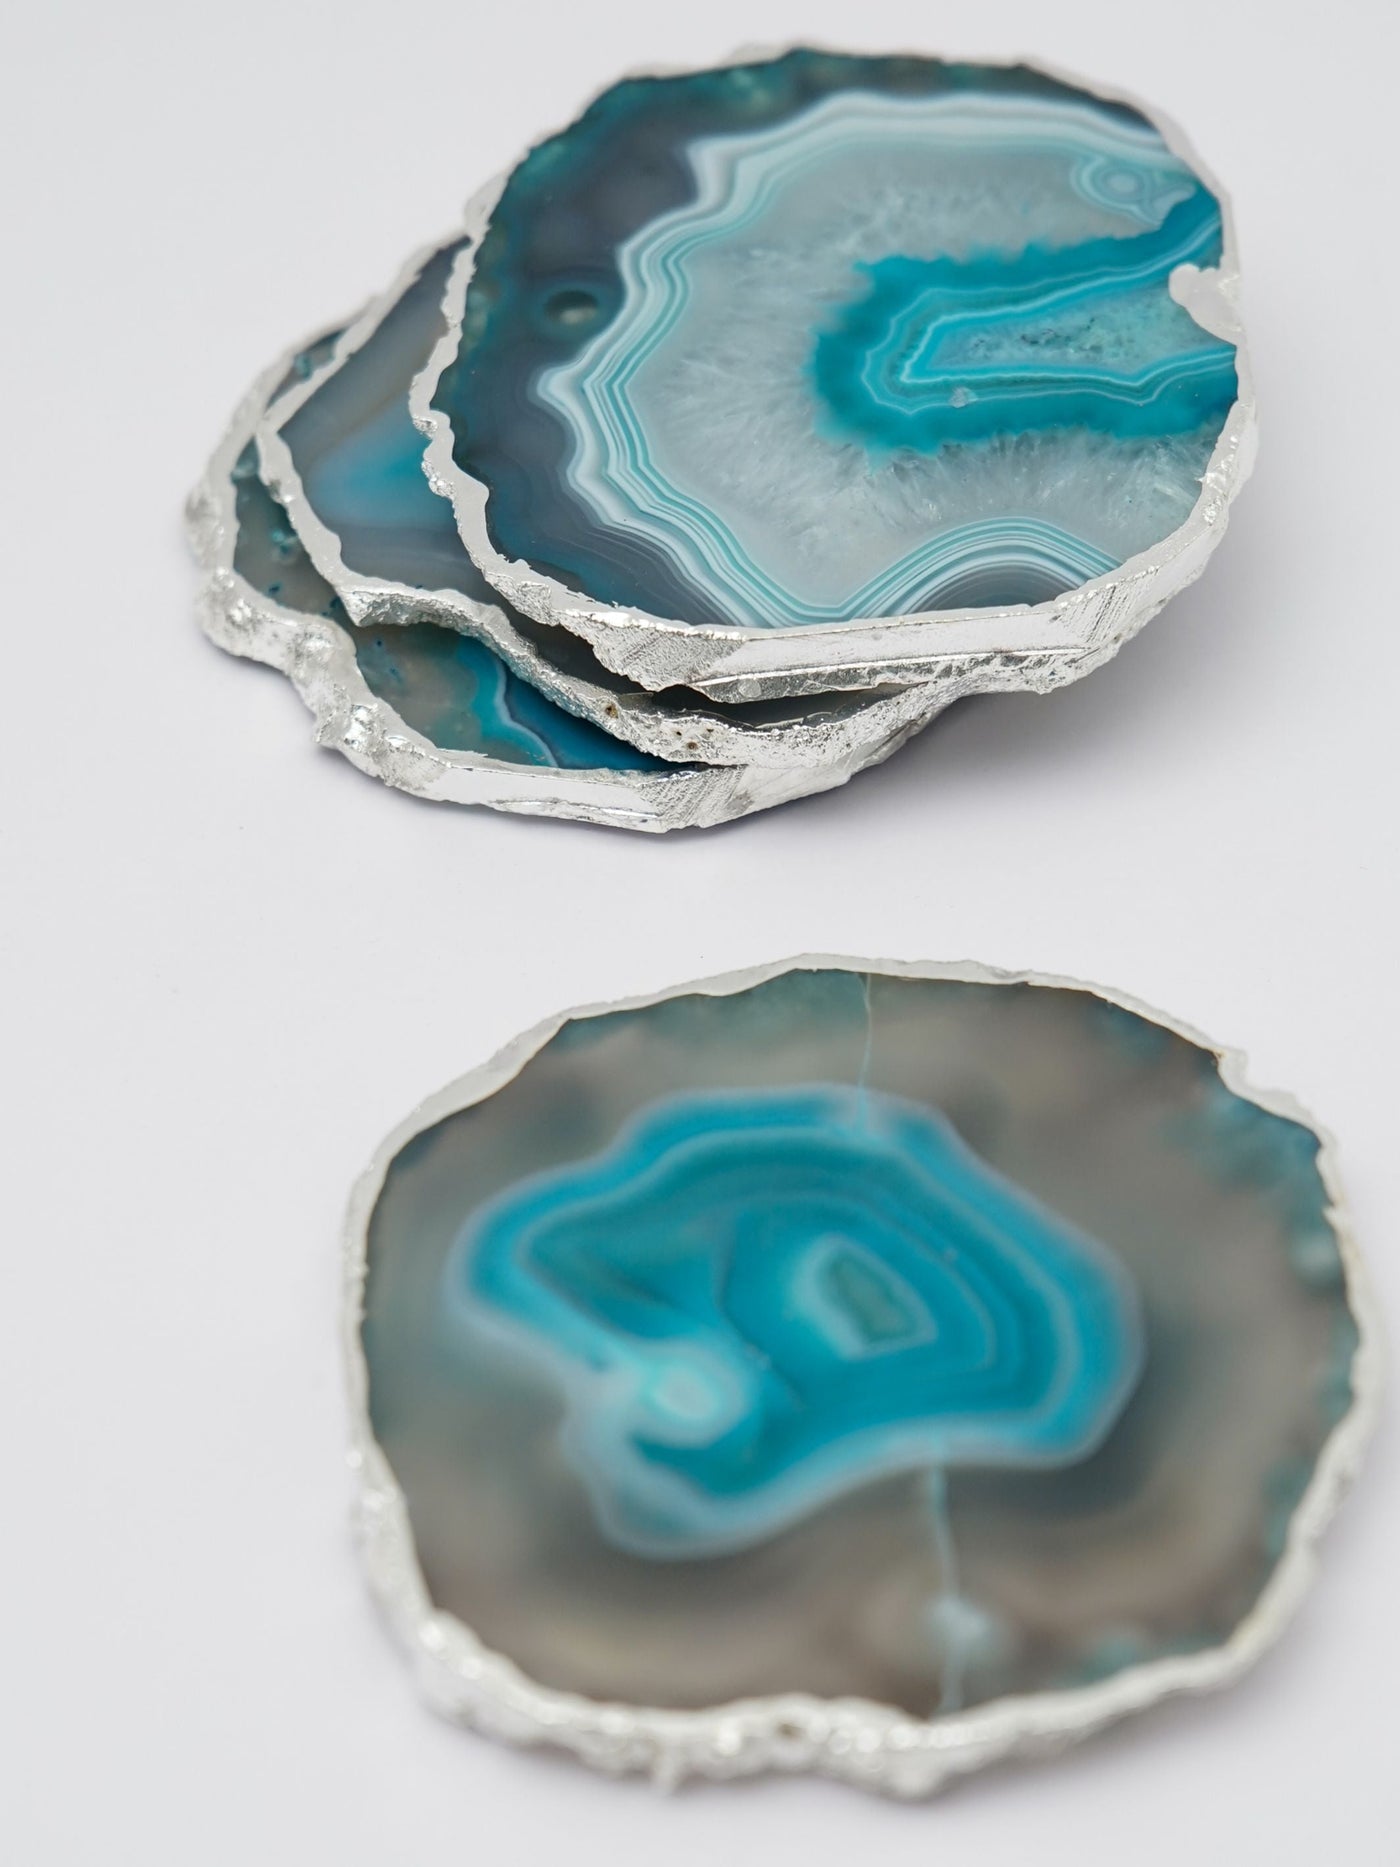 Coaster Set of 4 - Brazilian Agate Turquoise with Silver Plated edge